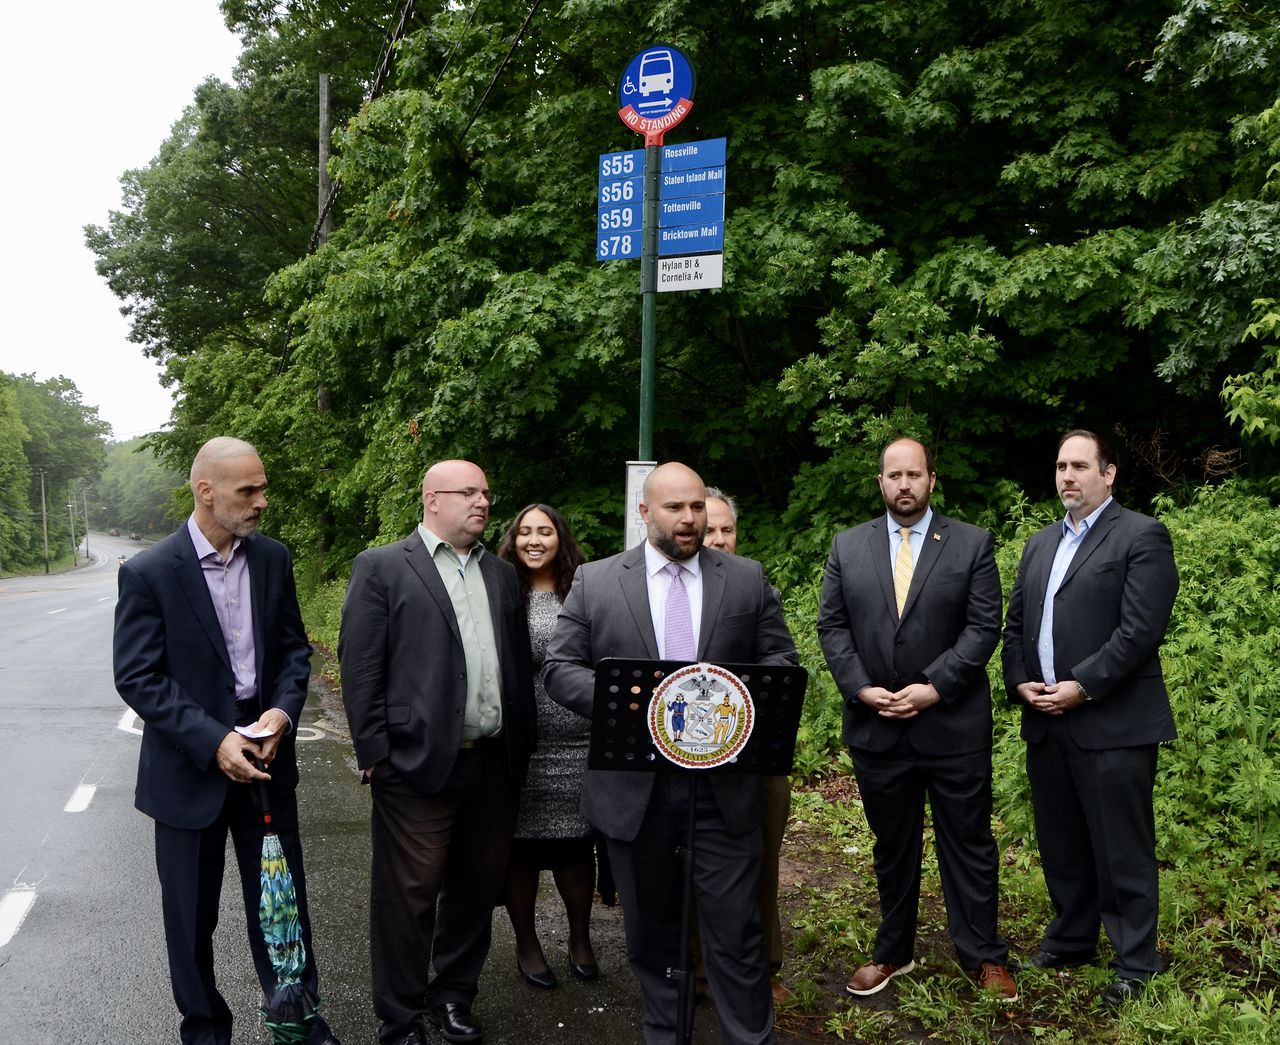 Lawmakers say lower speed limit on Hylan Boulevard does not prioritize pedestrian safety